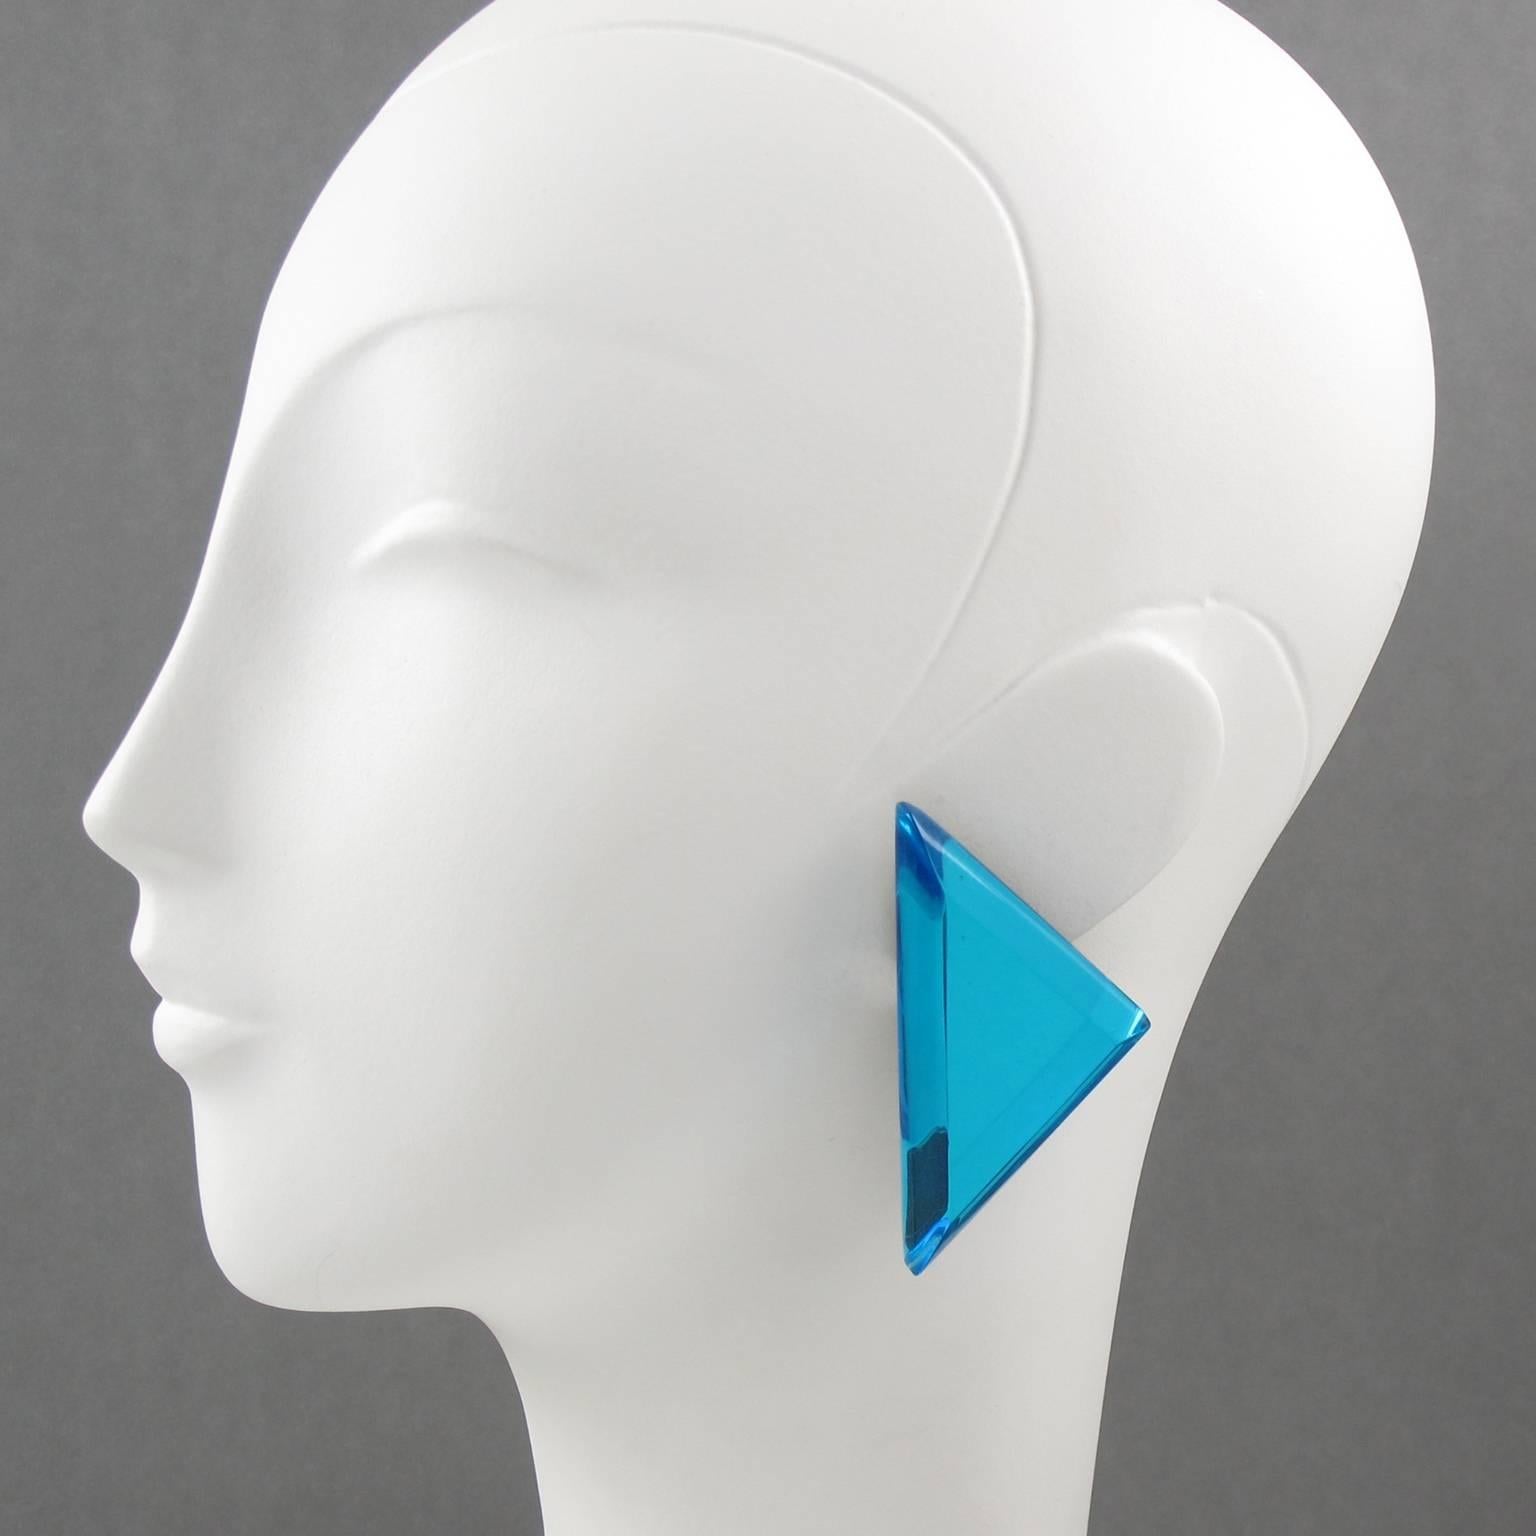 Beautiful oversized Lucite clip on earrings designed by Harriet Bauknight for Kaso. Huge geometric shape featuring dimensional layer with blue lagoon mirror texture pattern and large beveling. Kaso paper sticker missing but the gray background and